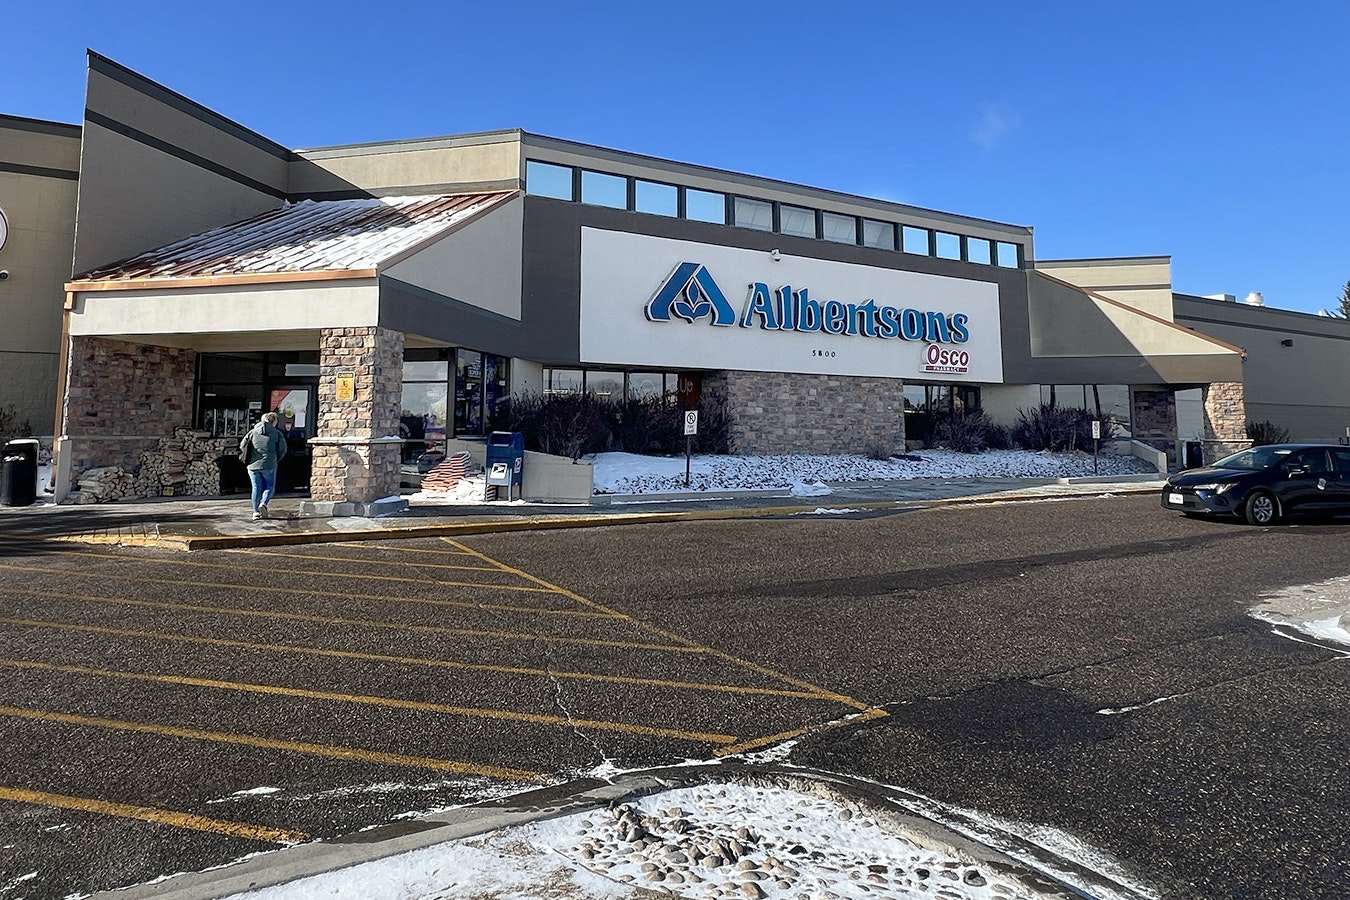 The Albertsons grocery store at 5800 Yellowstone Road in Cheyenne.